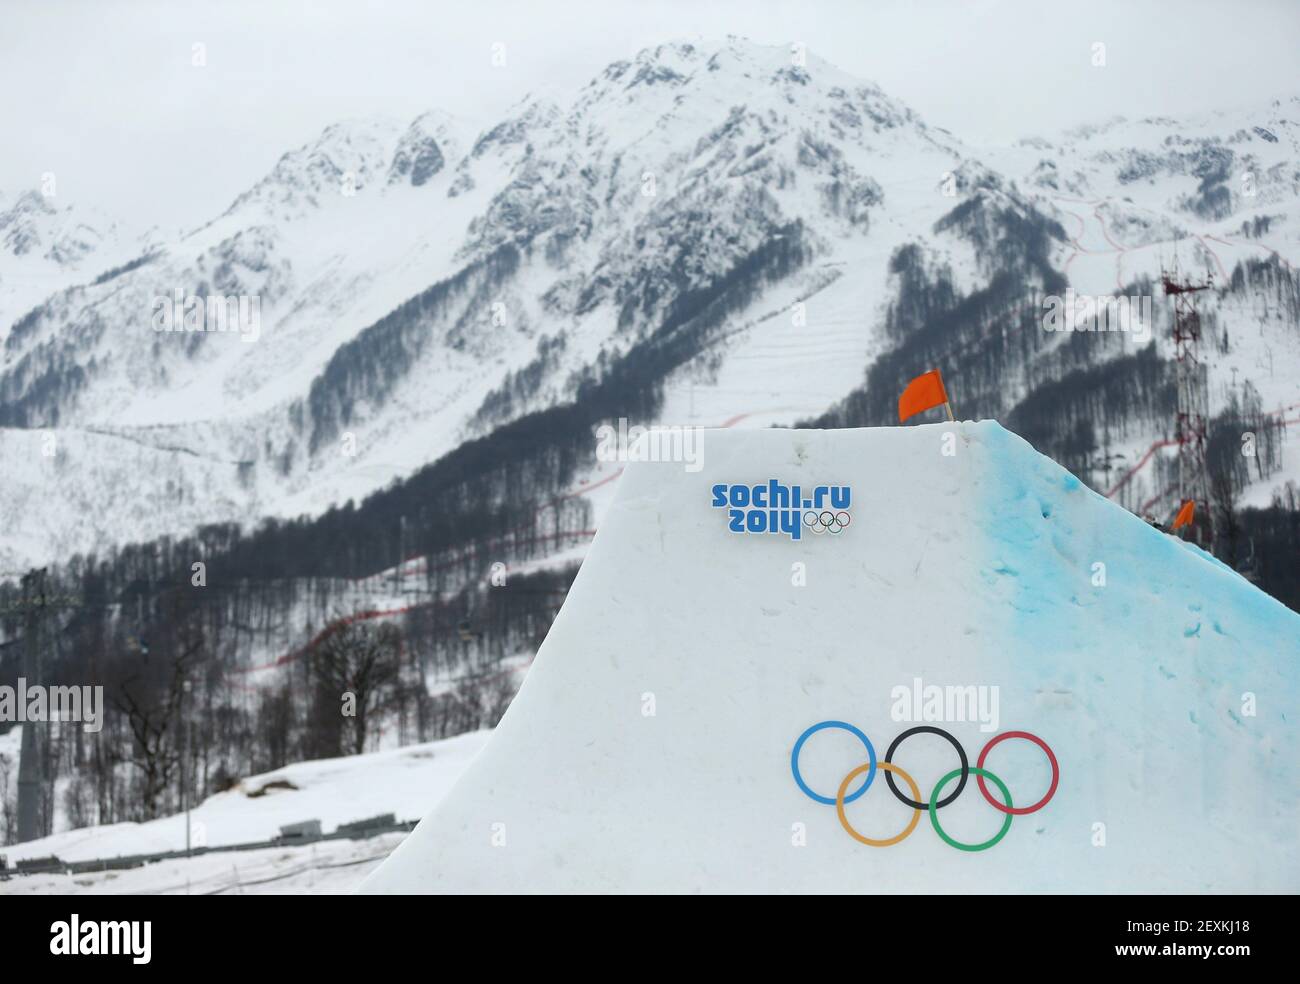 A jump with the Olympic logo on the ladies' ski slopestyle at the Rosa Khutor Extreme Park during the Winter Olympics in Sochi, Russia, Tuesday, Feb. 11, 2014. (Photo by Brian Cassella/Chicago Tribune/MCT/Sipa USA) Stock Photo